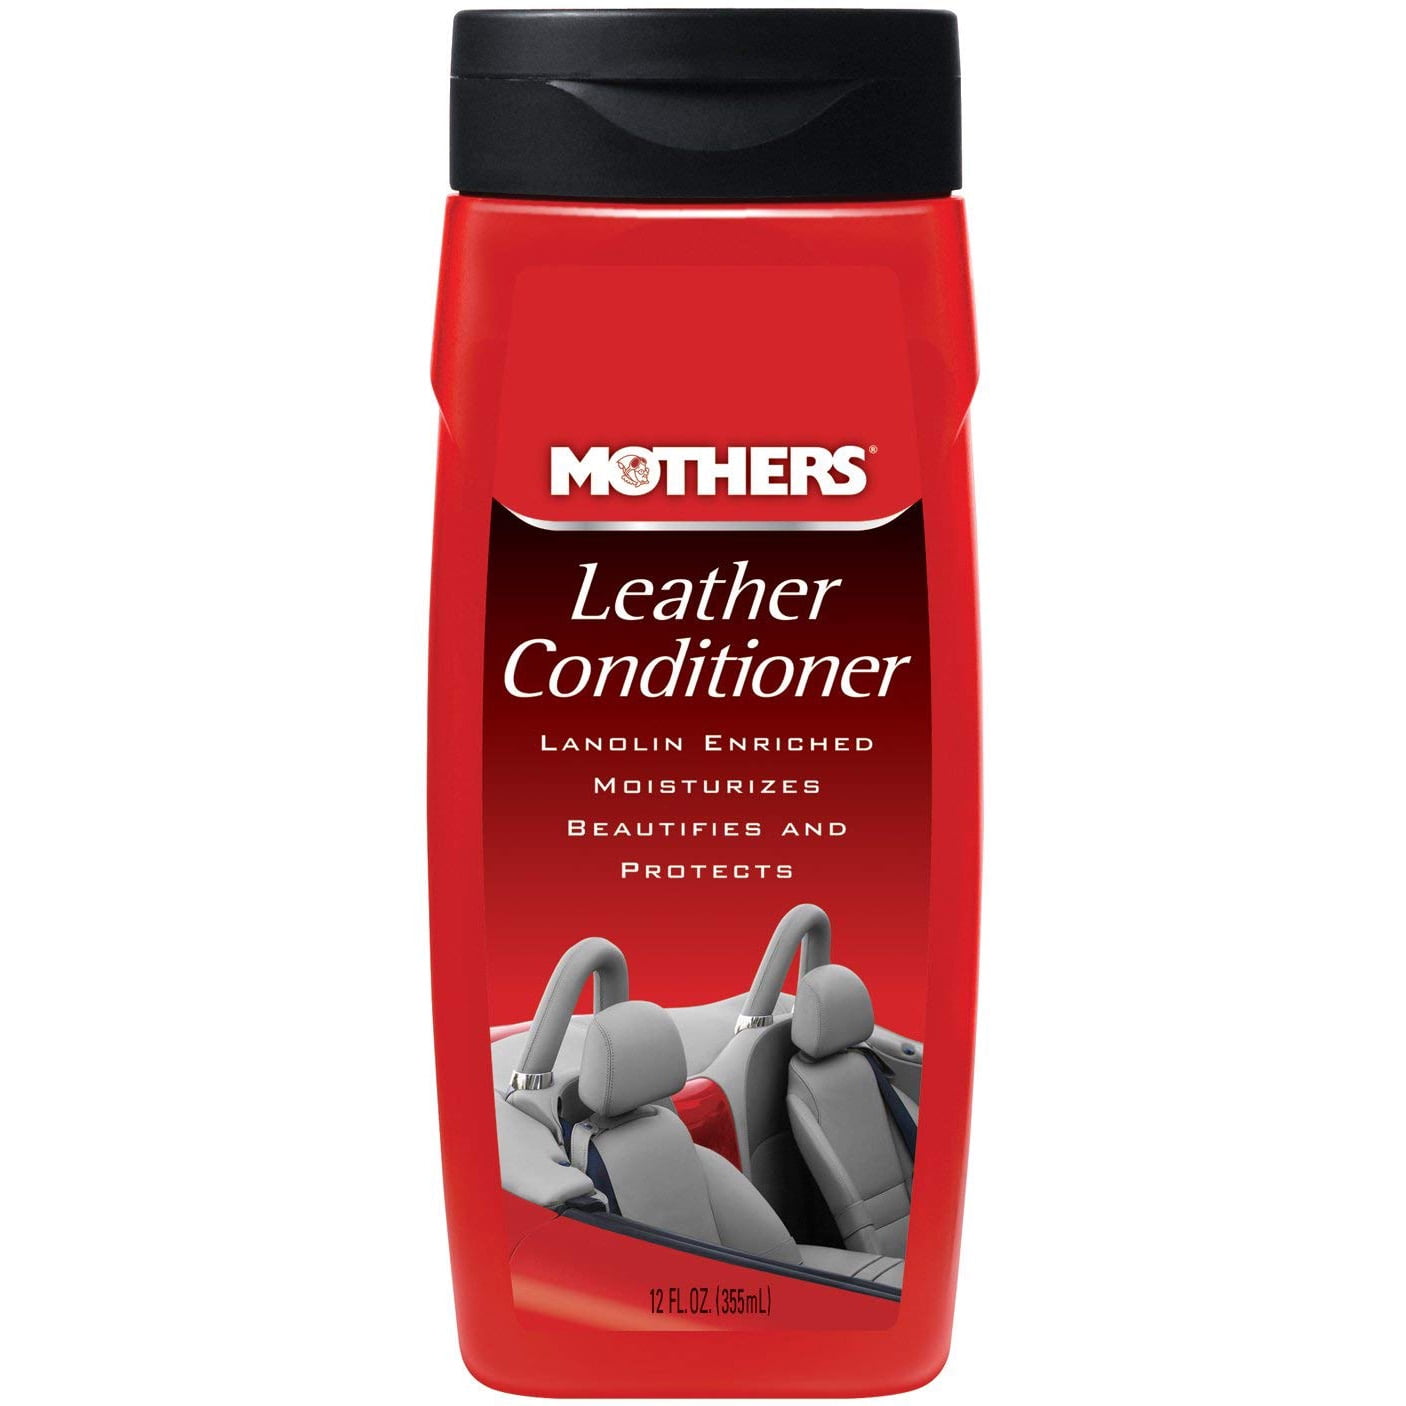 Mothers Leather Conditioner